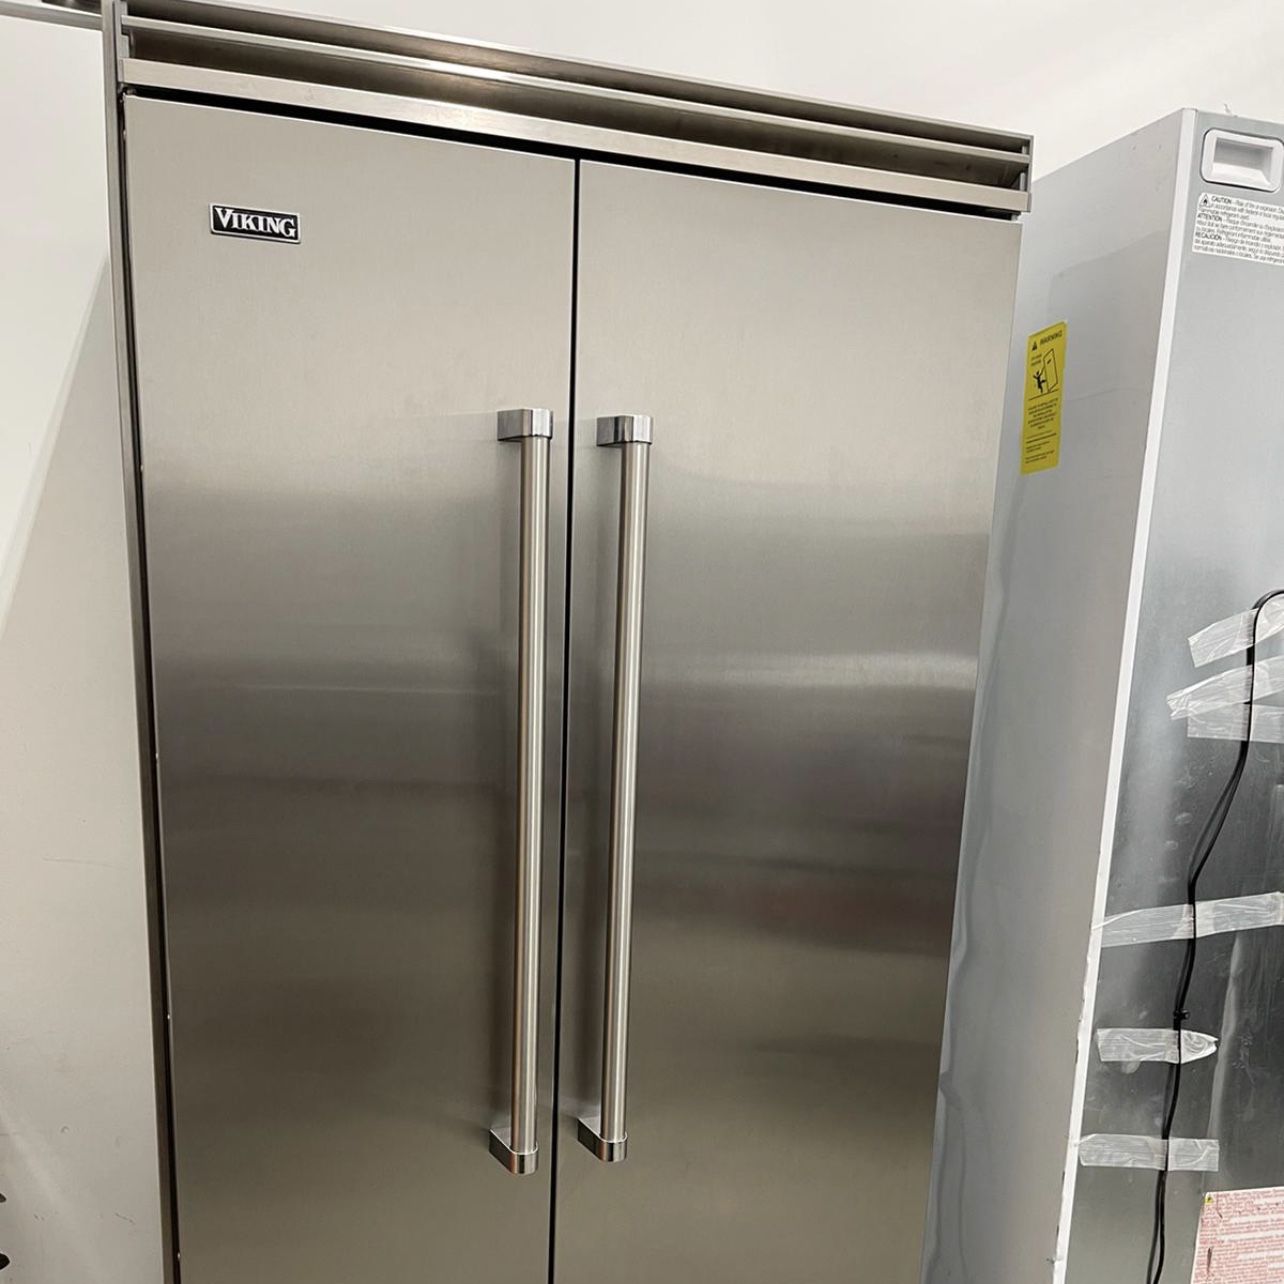 Viking 42" Professional 5 Series Stainless Steel Built-In Side-By-Side Refrigerator - VCSB5423SS